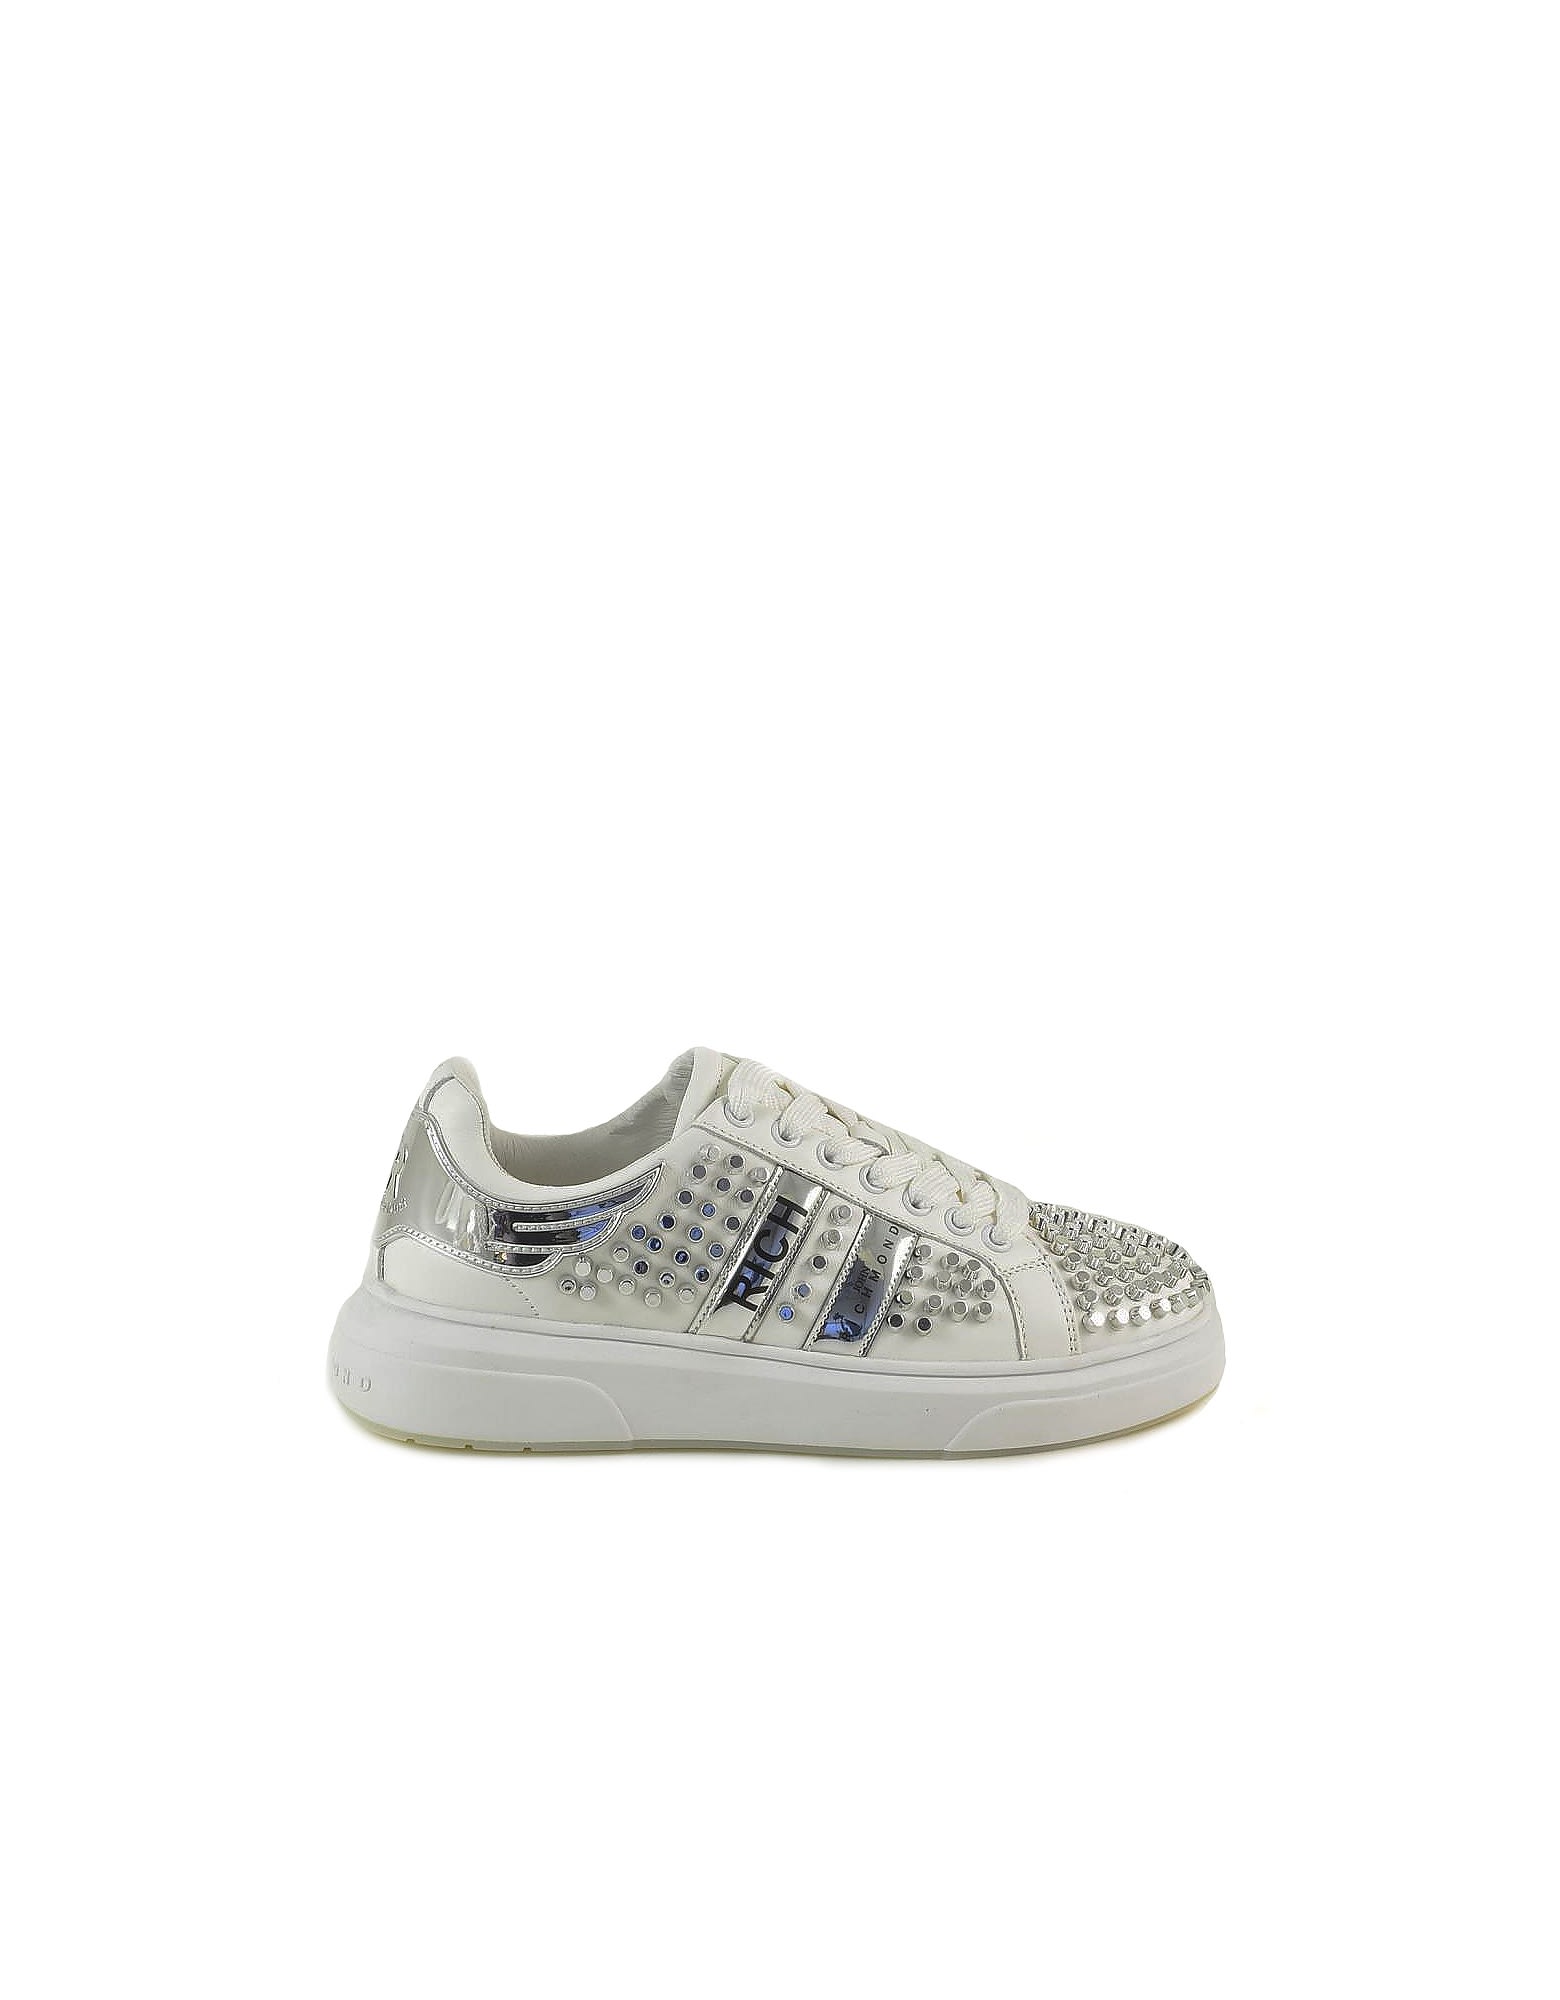 John Richmond White Studded Leather Sneakers